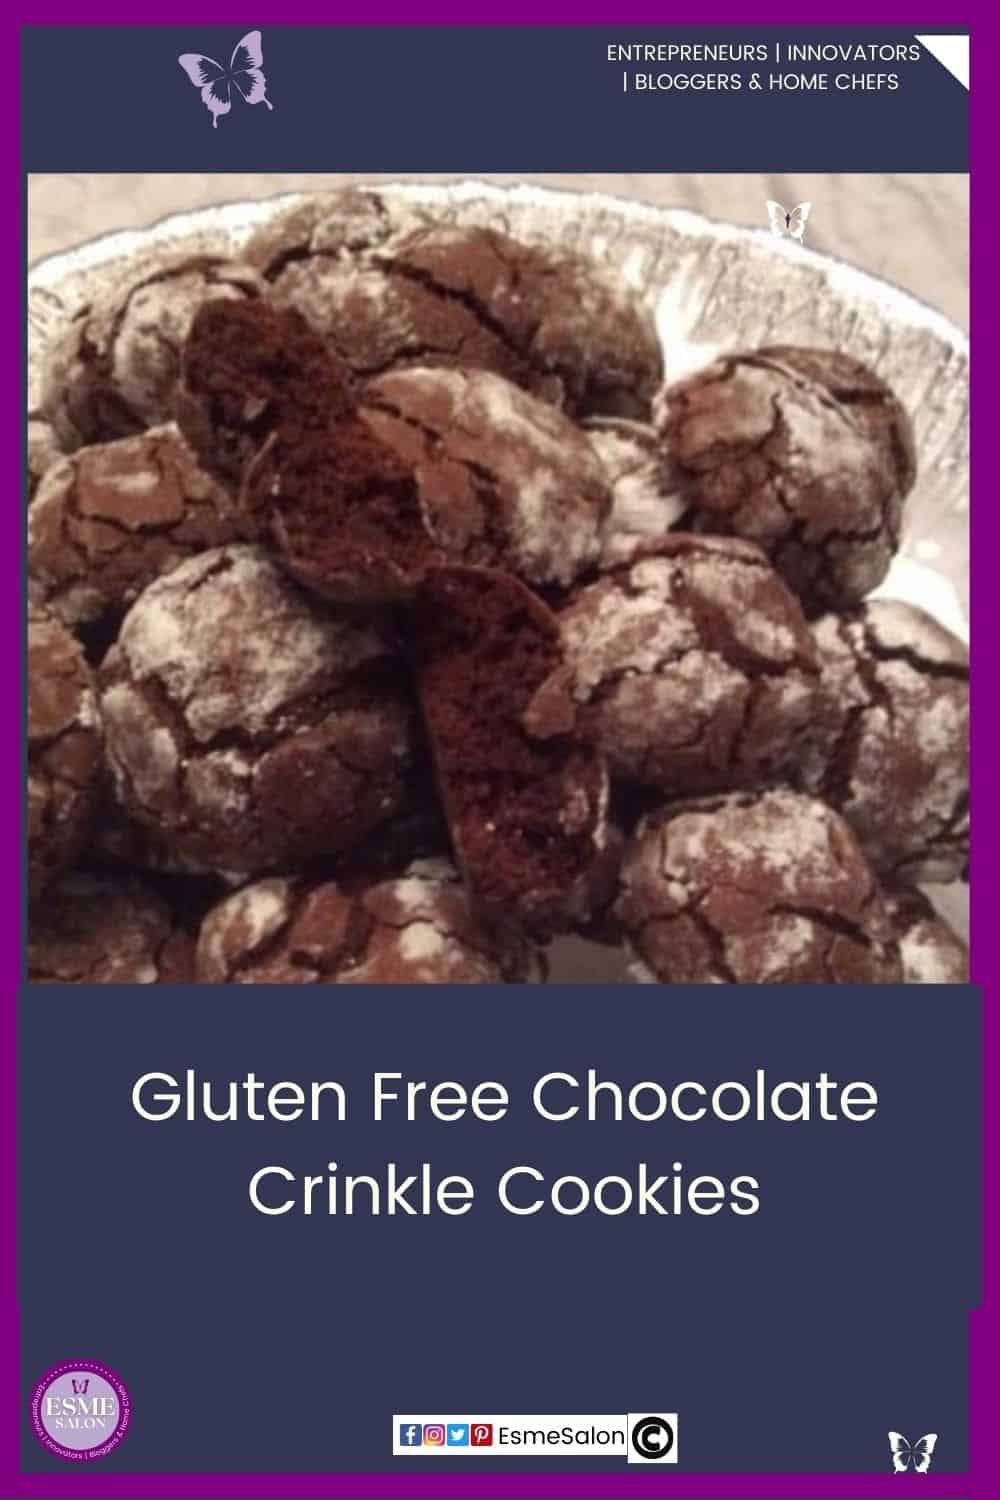 an image of a glass platter with baked Gluten Free Chocolate Crinkle Cookies